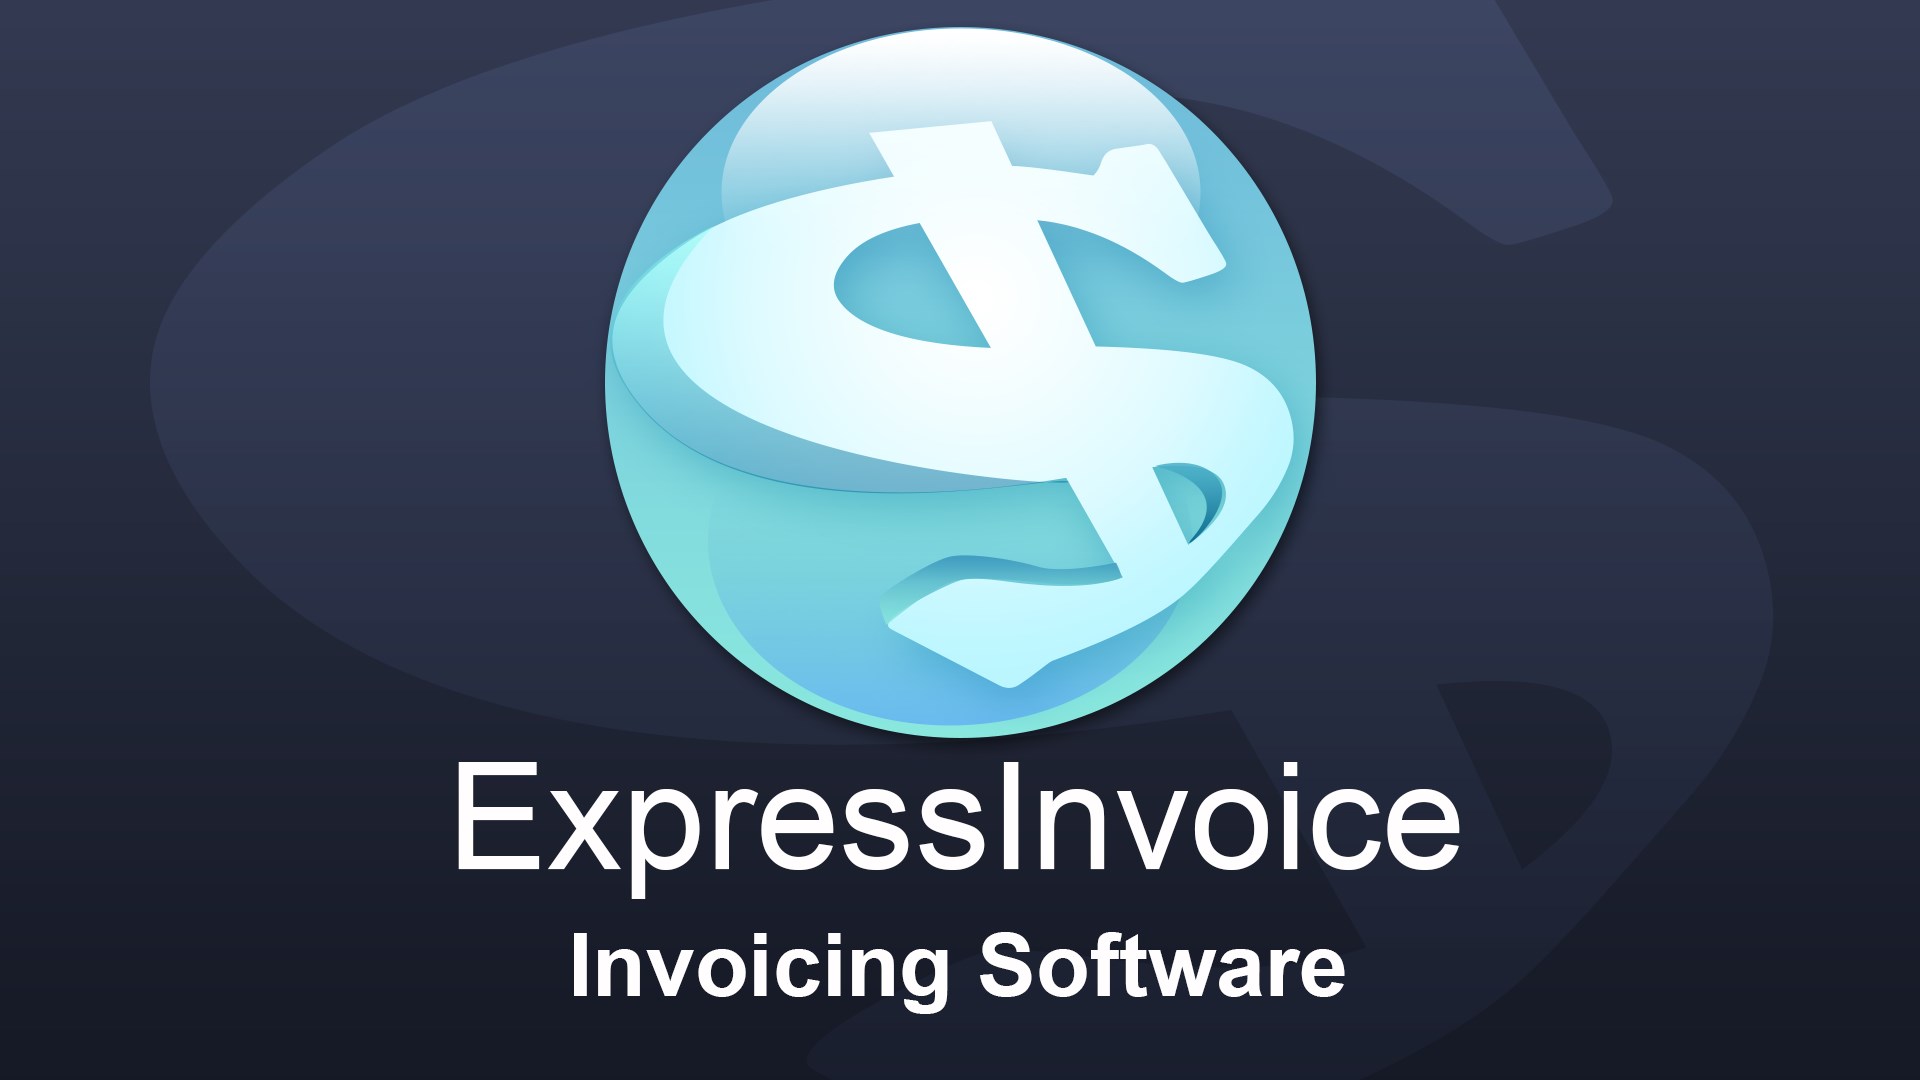 NCH: Express Invoice Invoicing Key [$ 203.62]